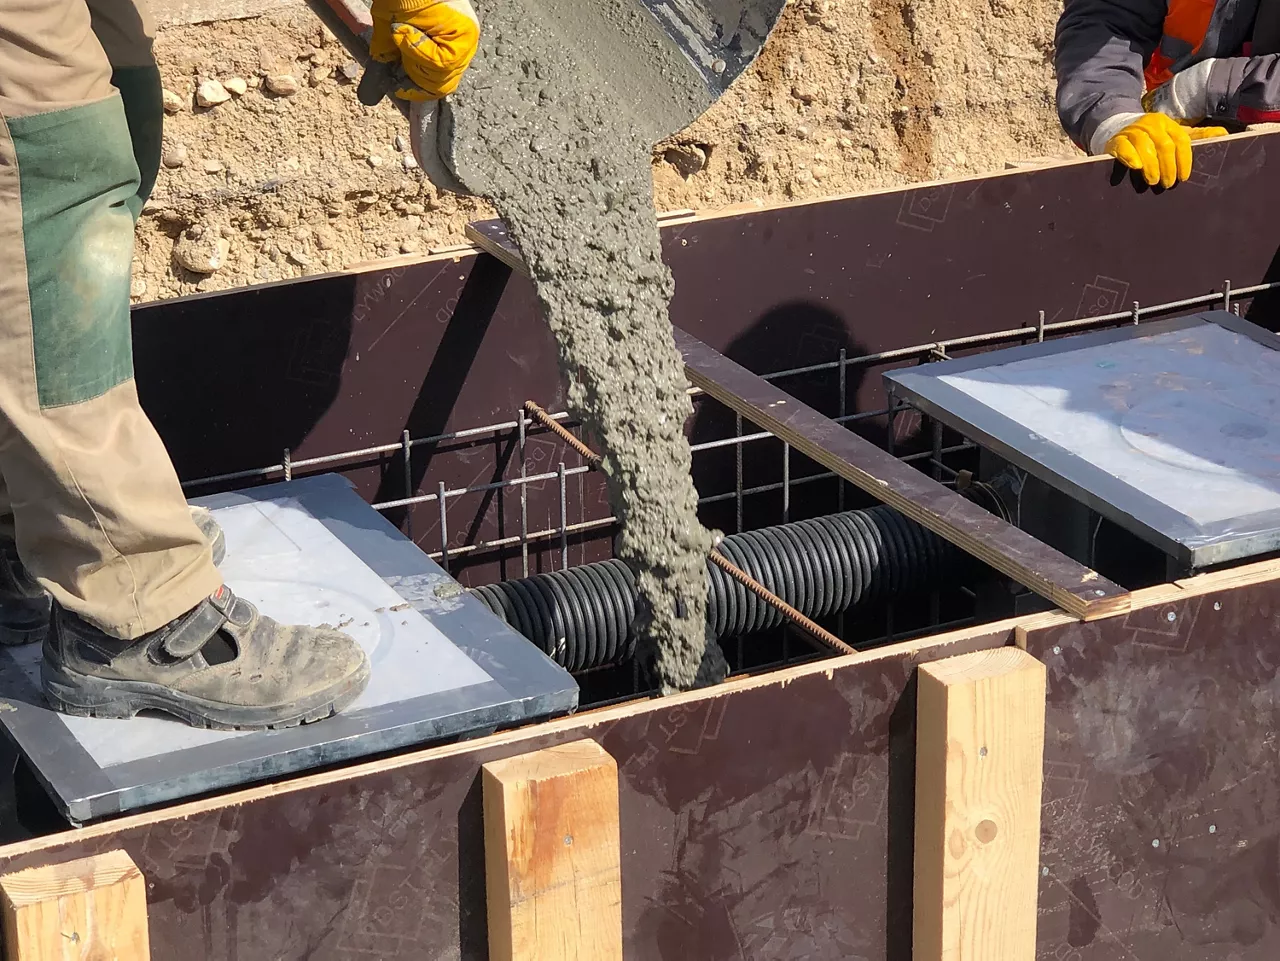 Construction workers are pooring concrete to formwork.